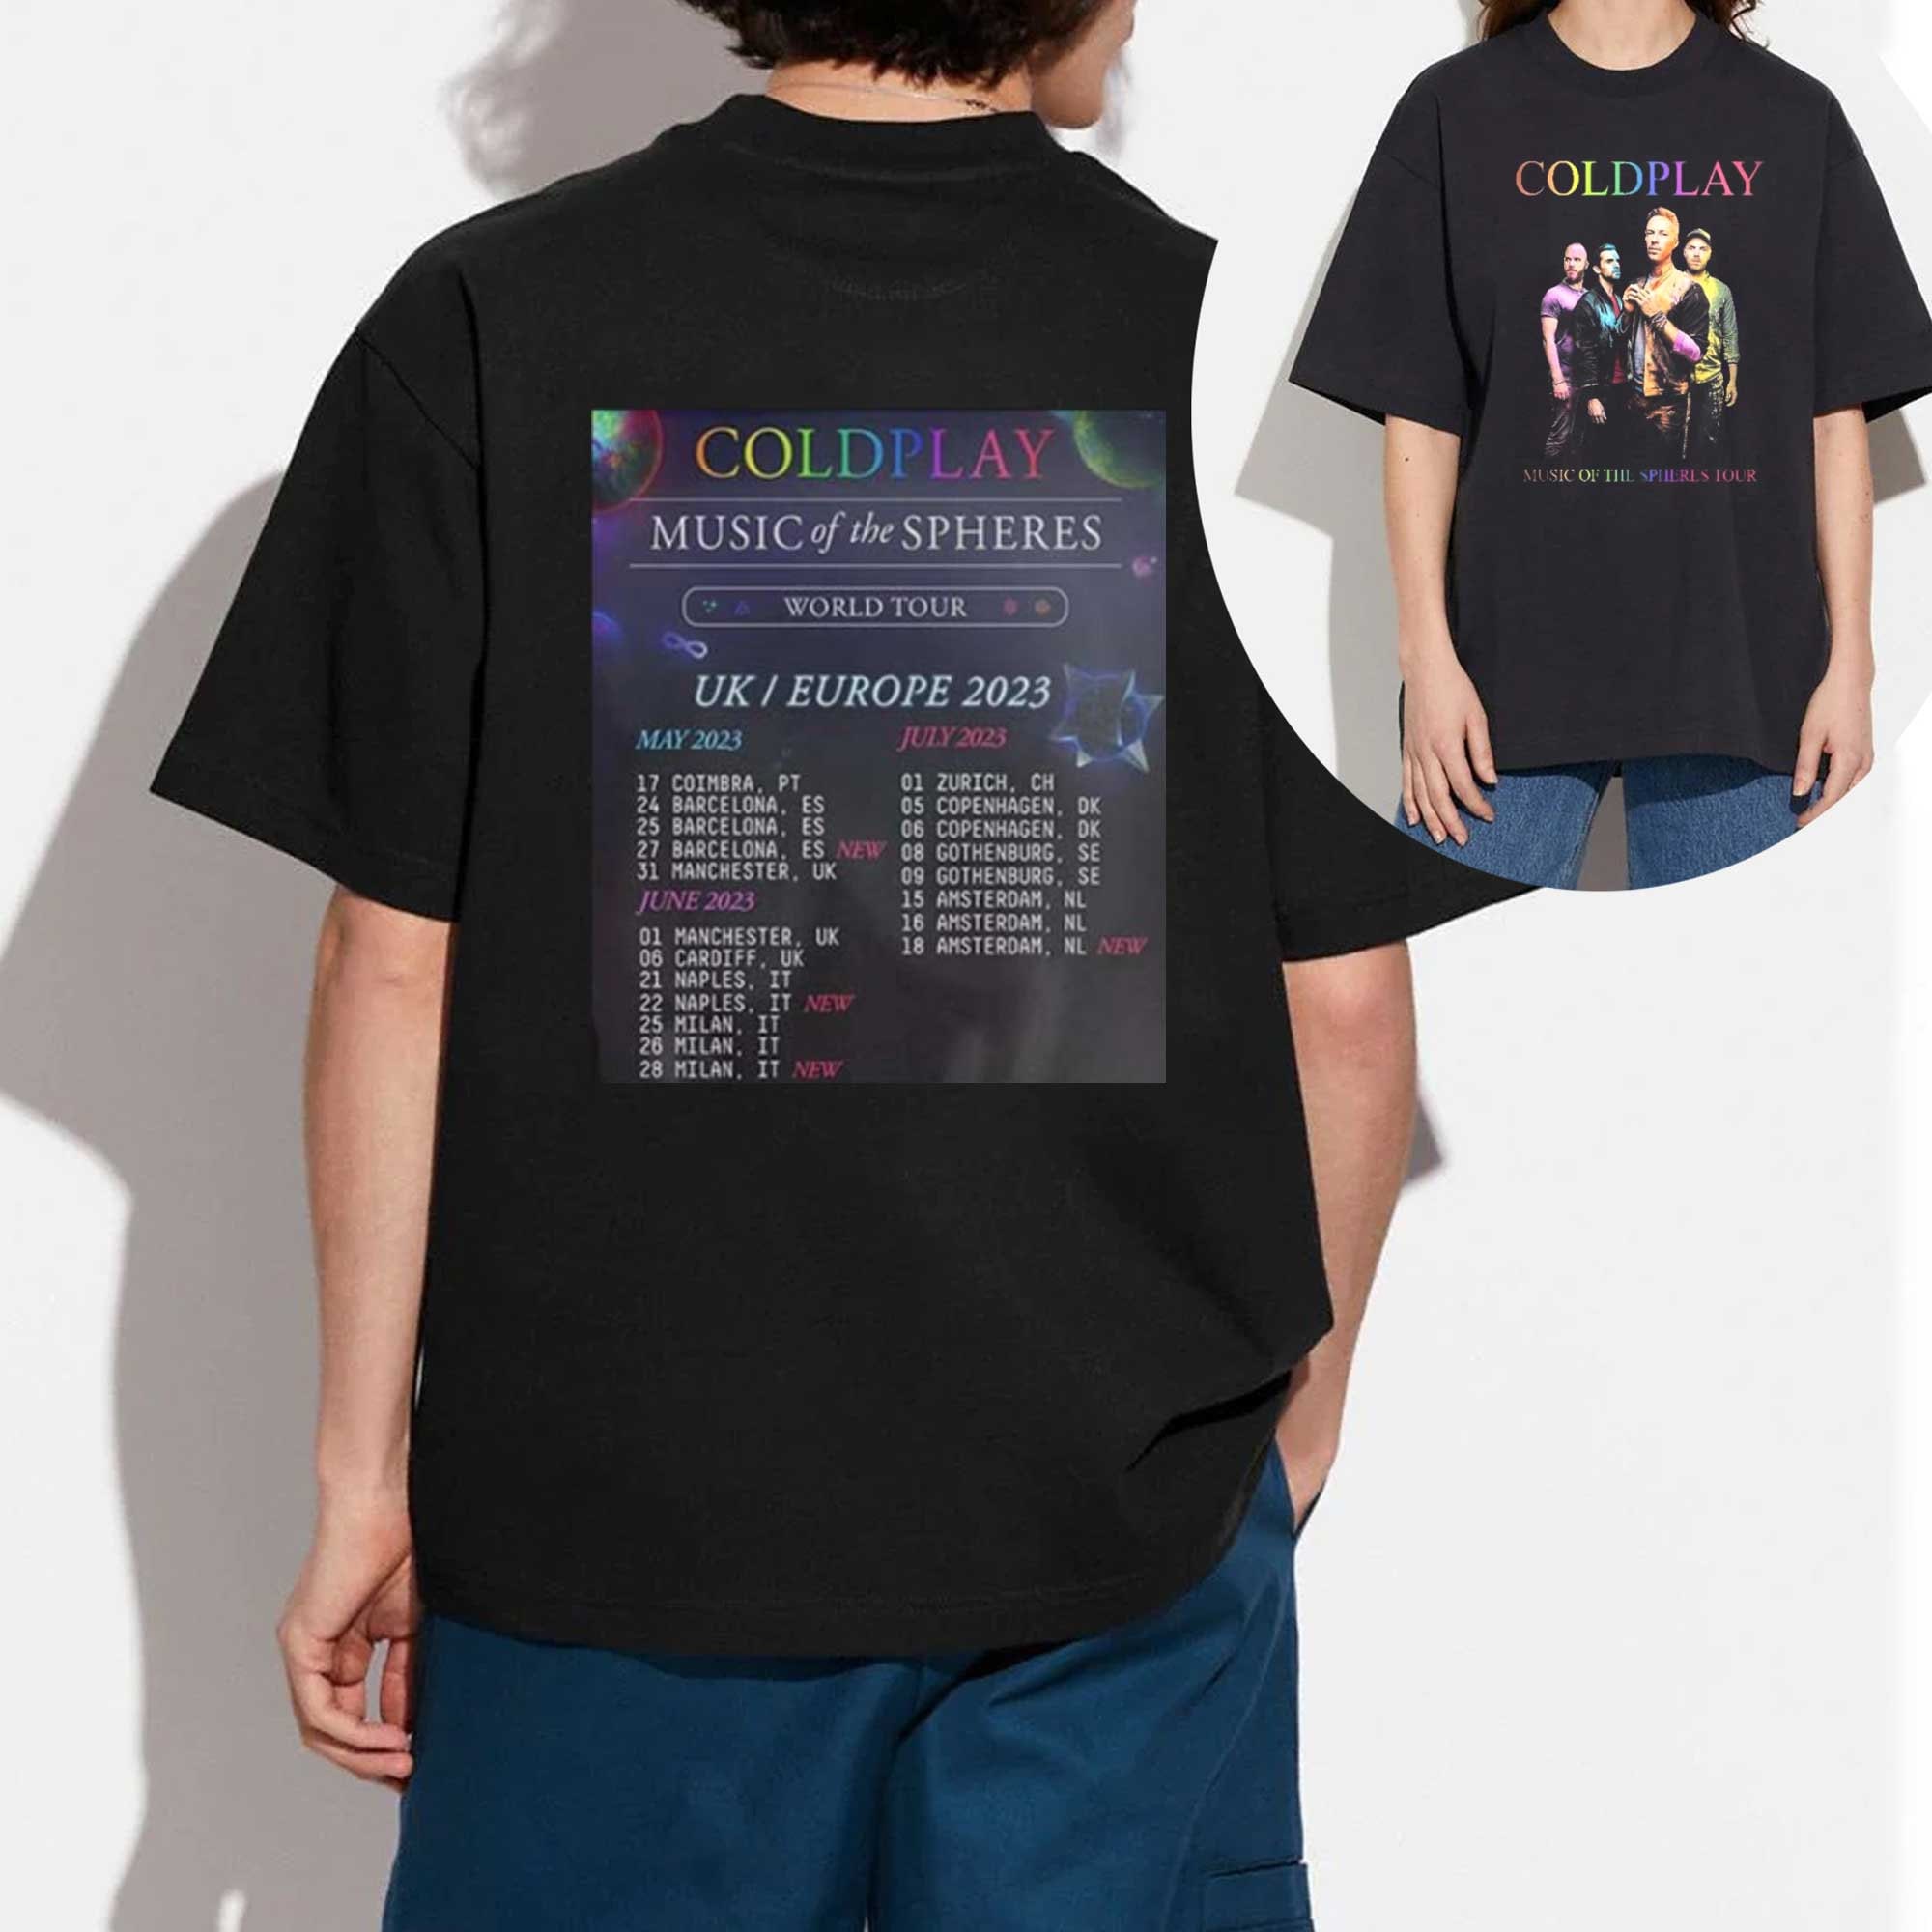 Discover Coldplay Music Of The Spheres T-Shirt, Coldplay Tour 2023 Shirt